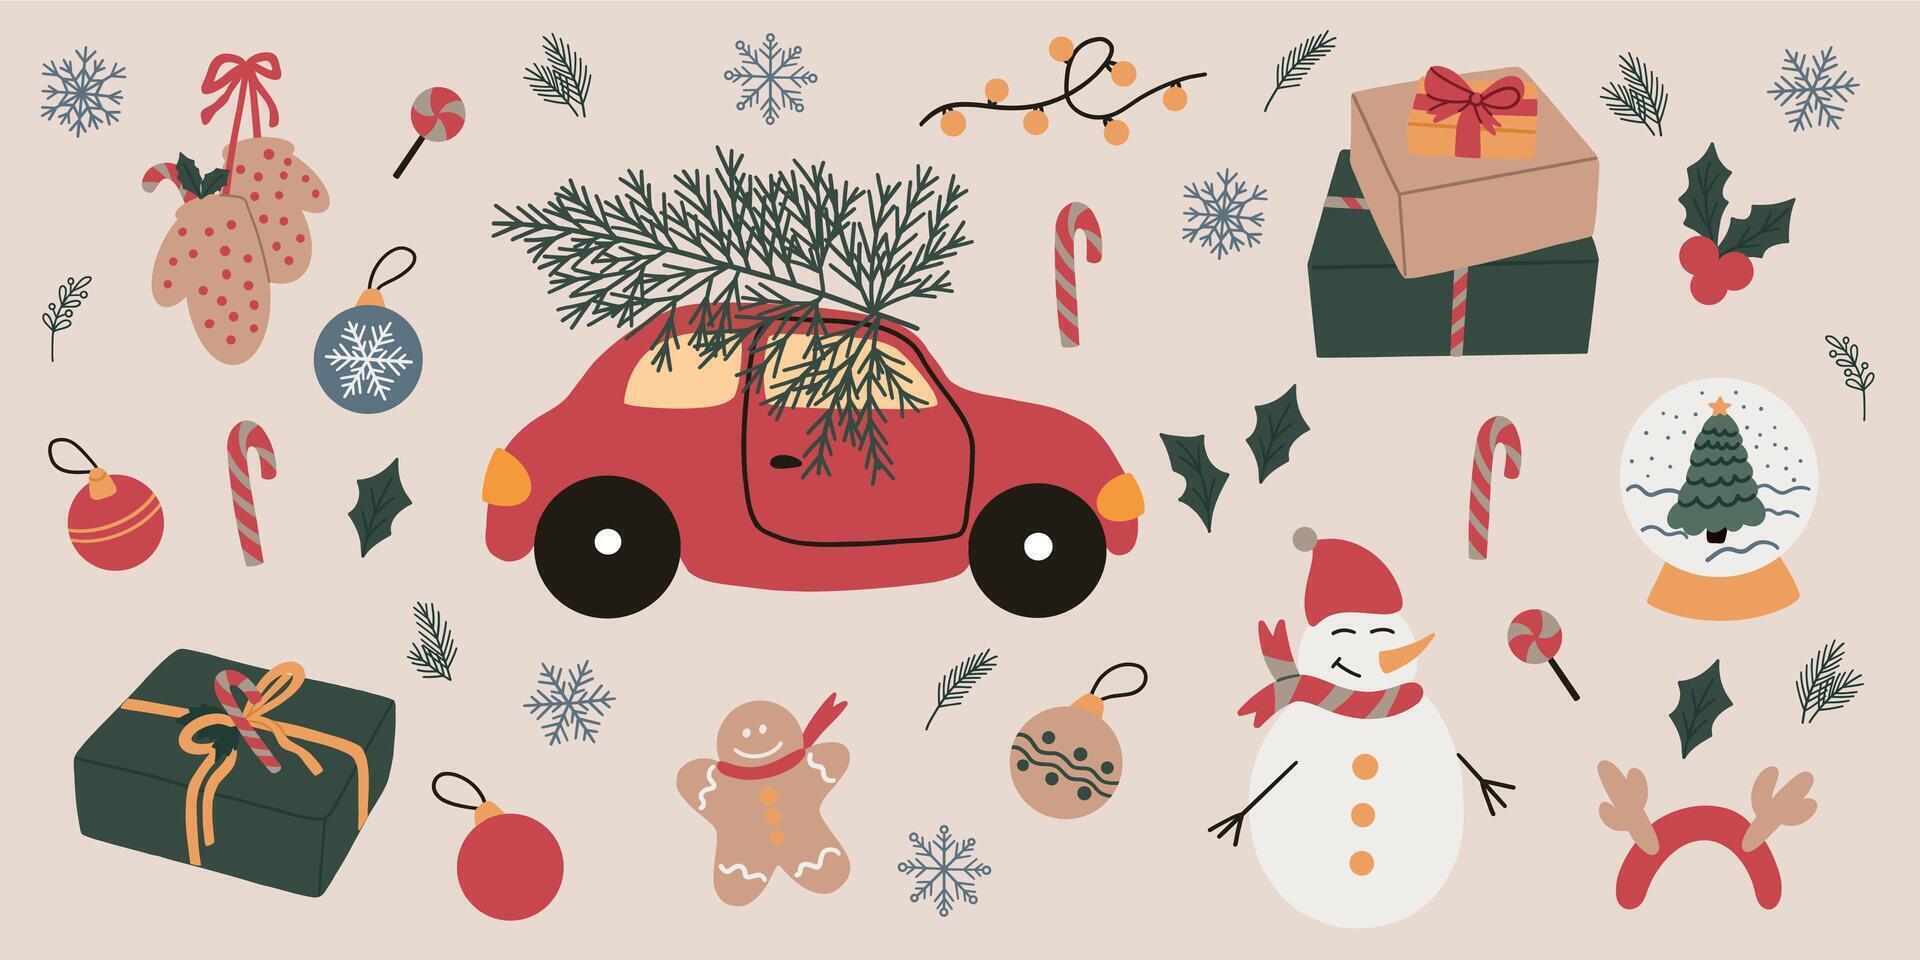 Merry Christmas and Happy New Year elements. Cozy collection. Set of traditional winter symbols. Snowman, car, gifts, snowflake, gingerbread man and other. Happy holliday. Hand drawn vector design